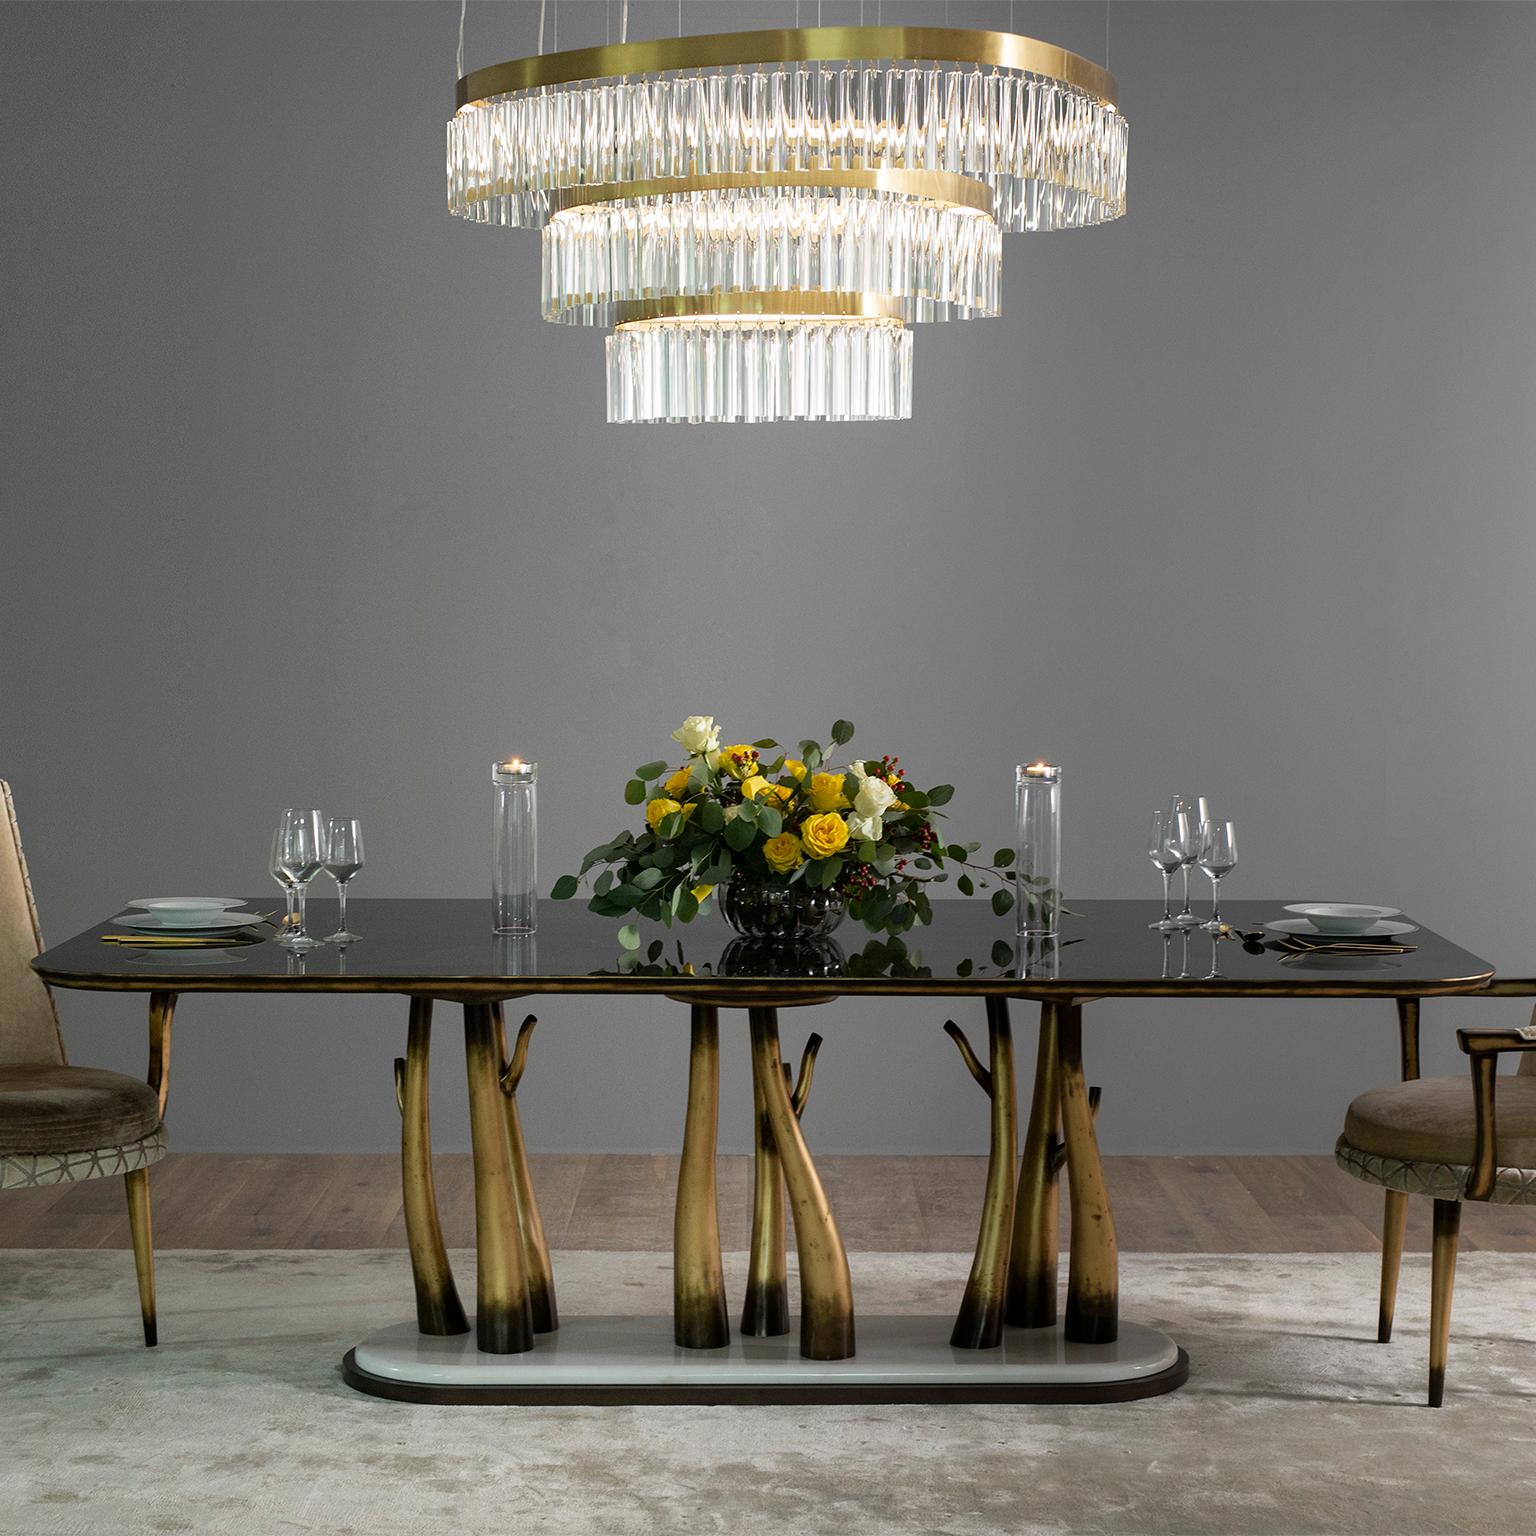 Vallin dining table, Modern Collection, Handcrafted in Portugal - Europe by GF Modern.

The branched legs in solid beech, lacquered with gold-coloured bronze powder, are a reminder of the inspiration from nature behind this creation. The exotic